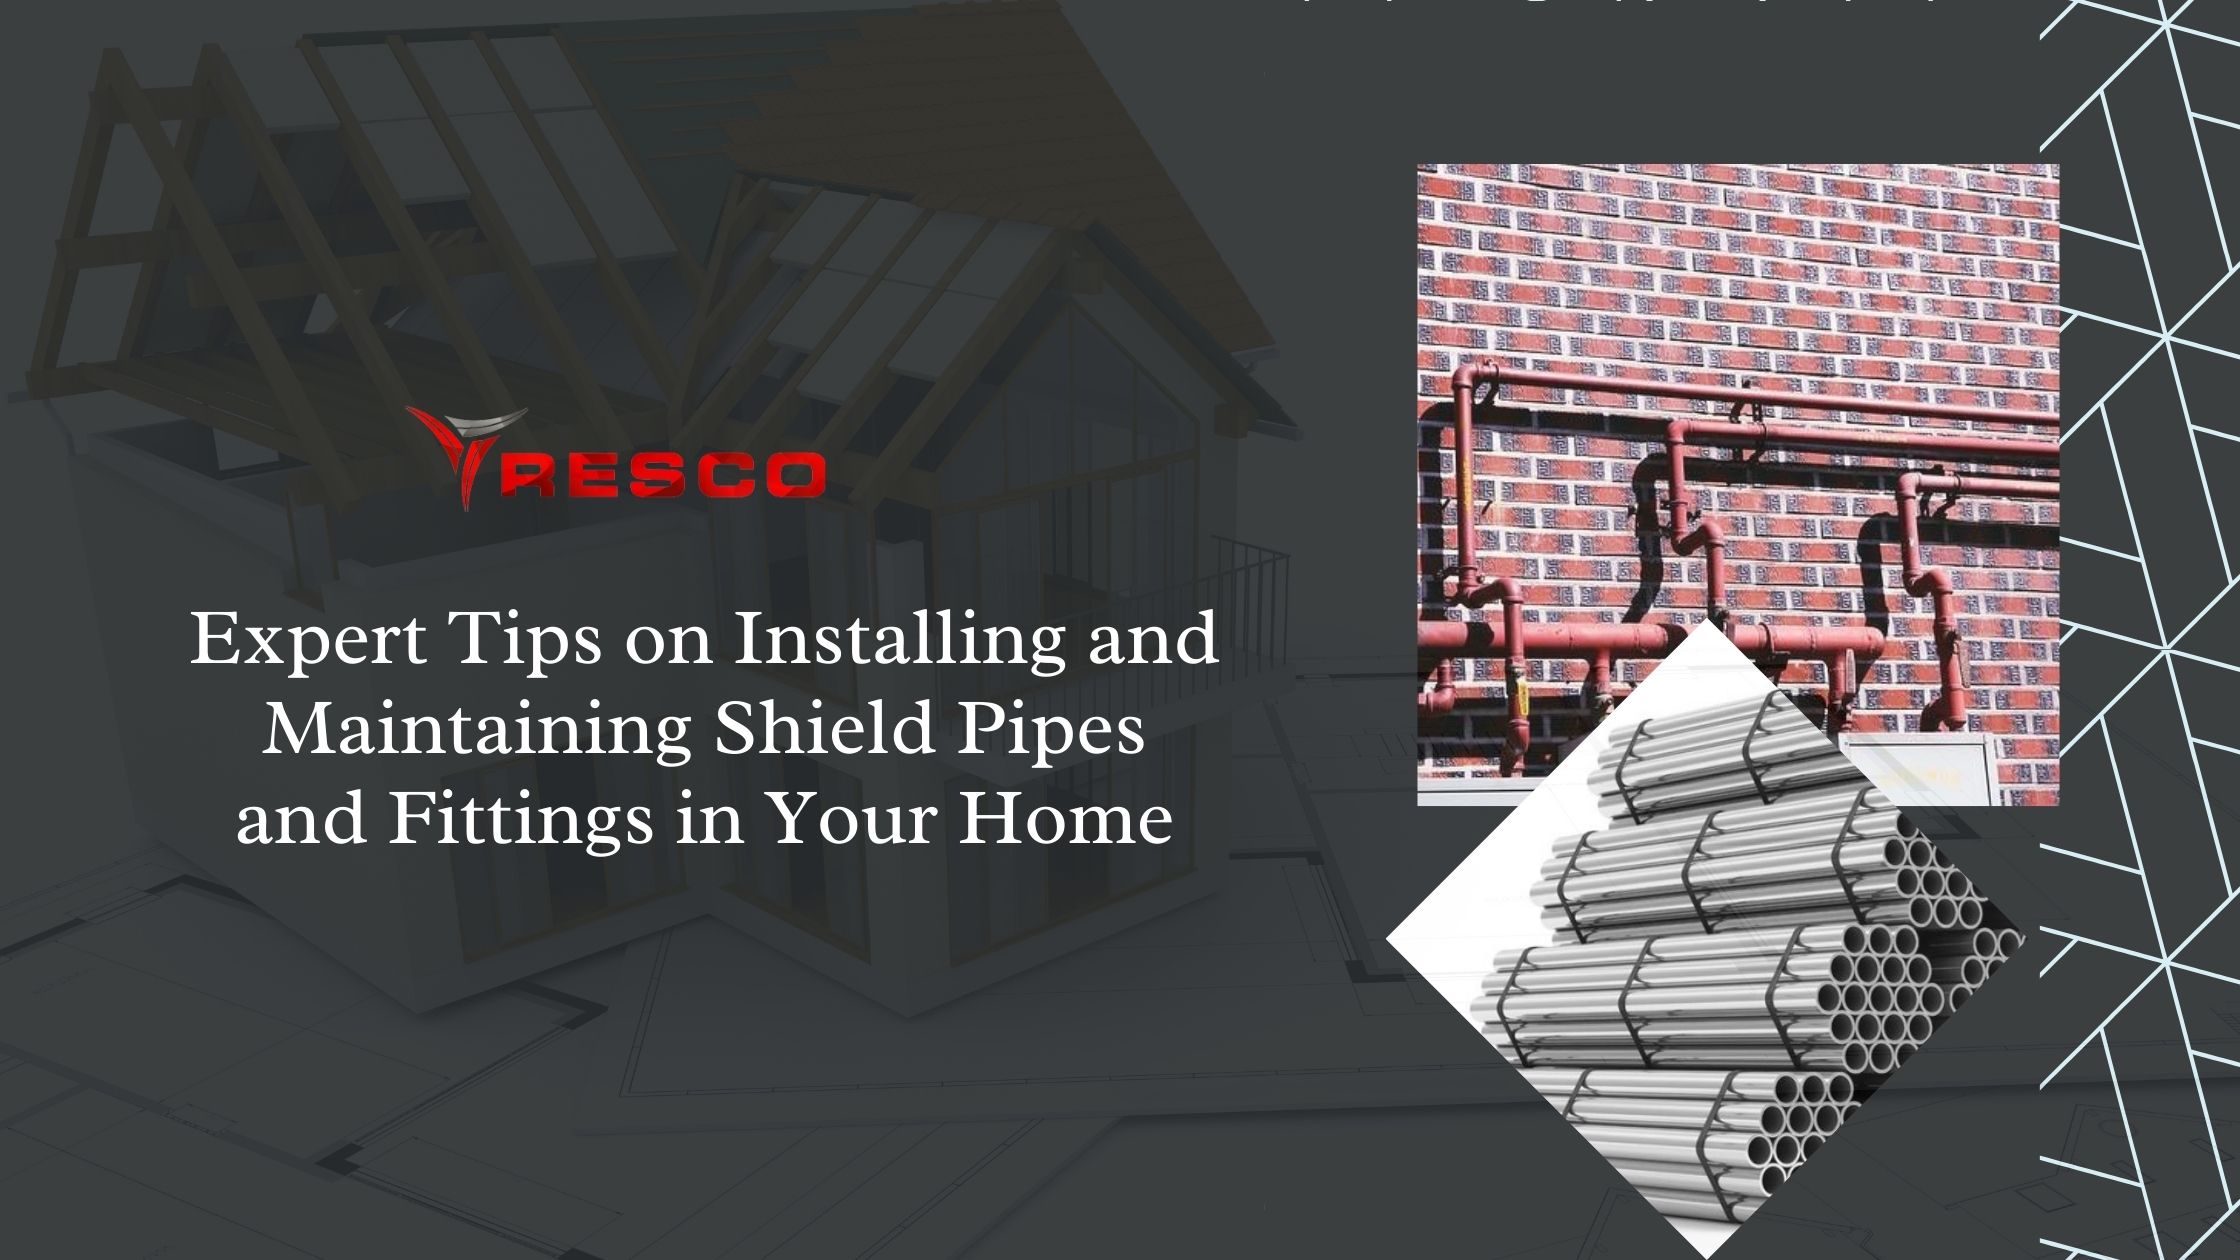 Expert Tips on Installing and Maintaining Shield Pipes and Fittings in Your Home